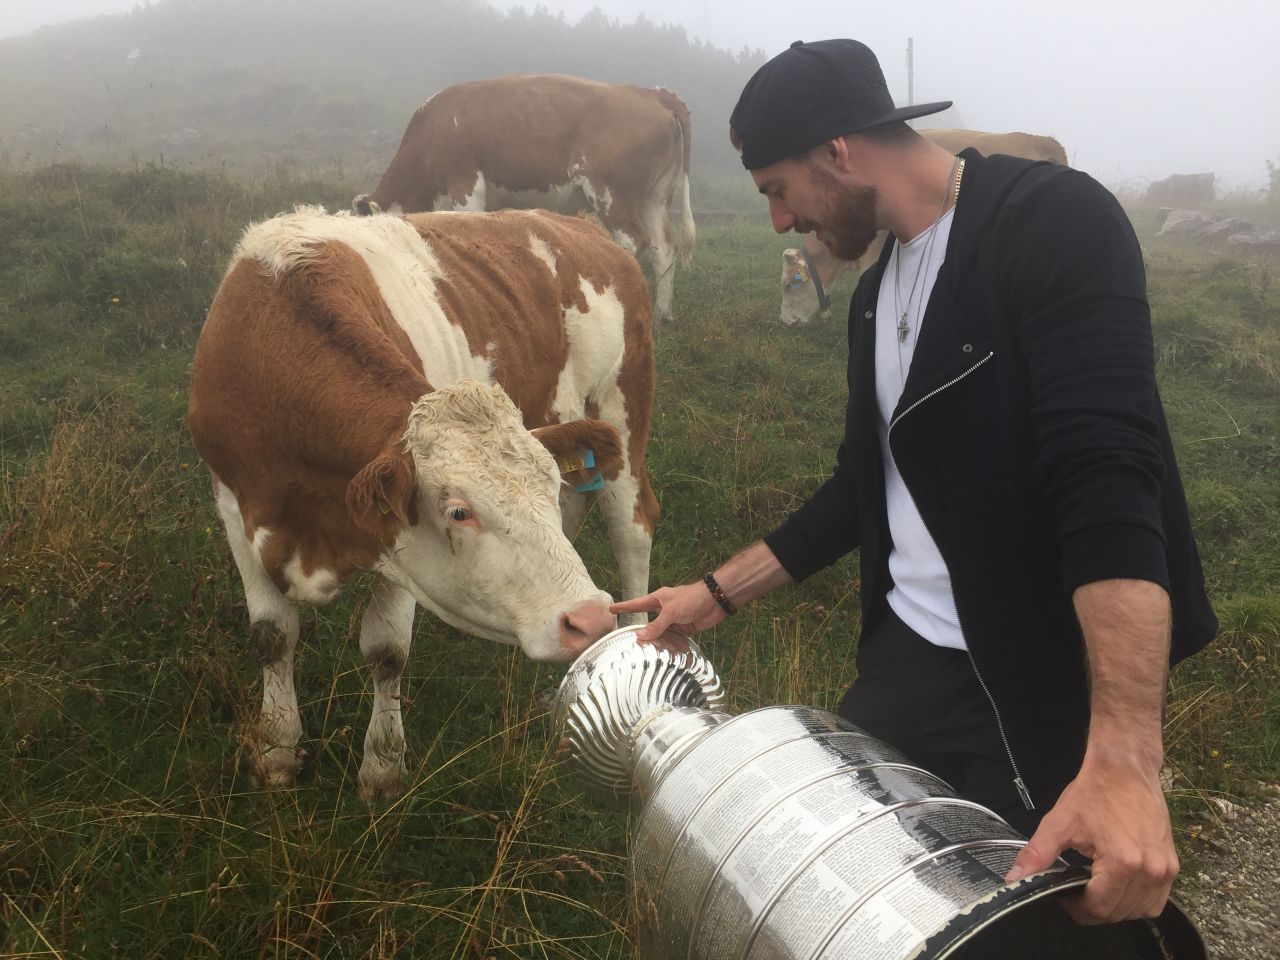 Goaltender Philipp Grubauer -- who has since been traded to the Colorado Avalanche -- brought the Stanley Cup to Rosenheim, Germany. Here he shares a moment with a Bavarian bovine.